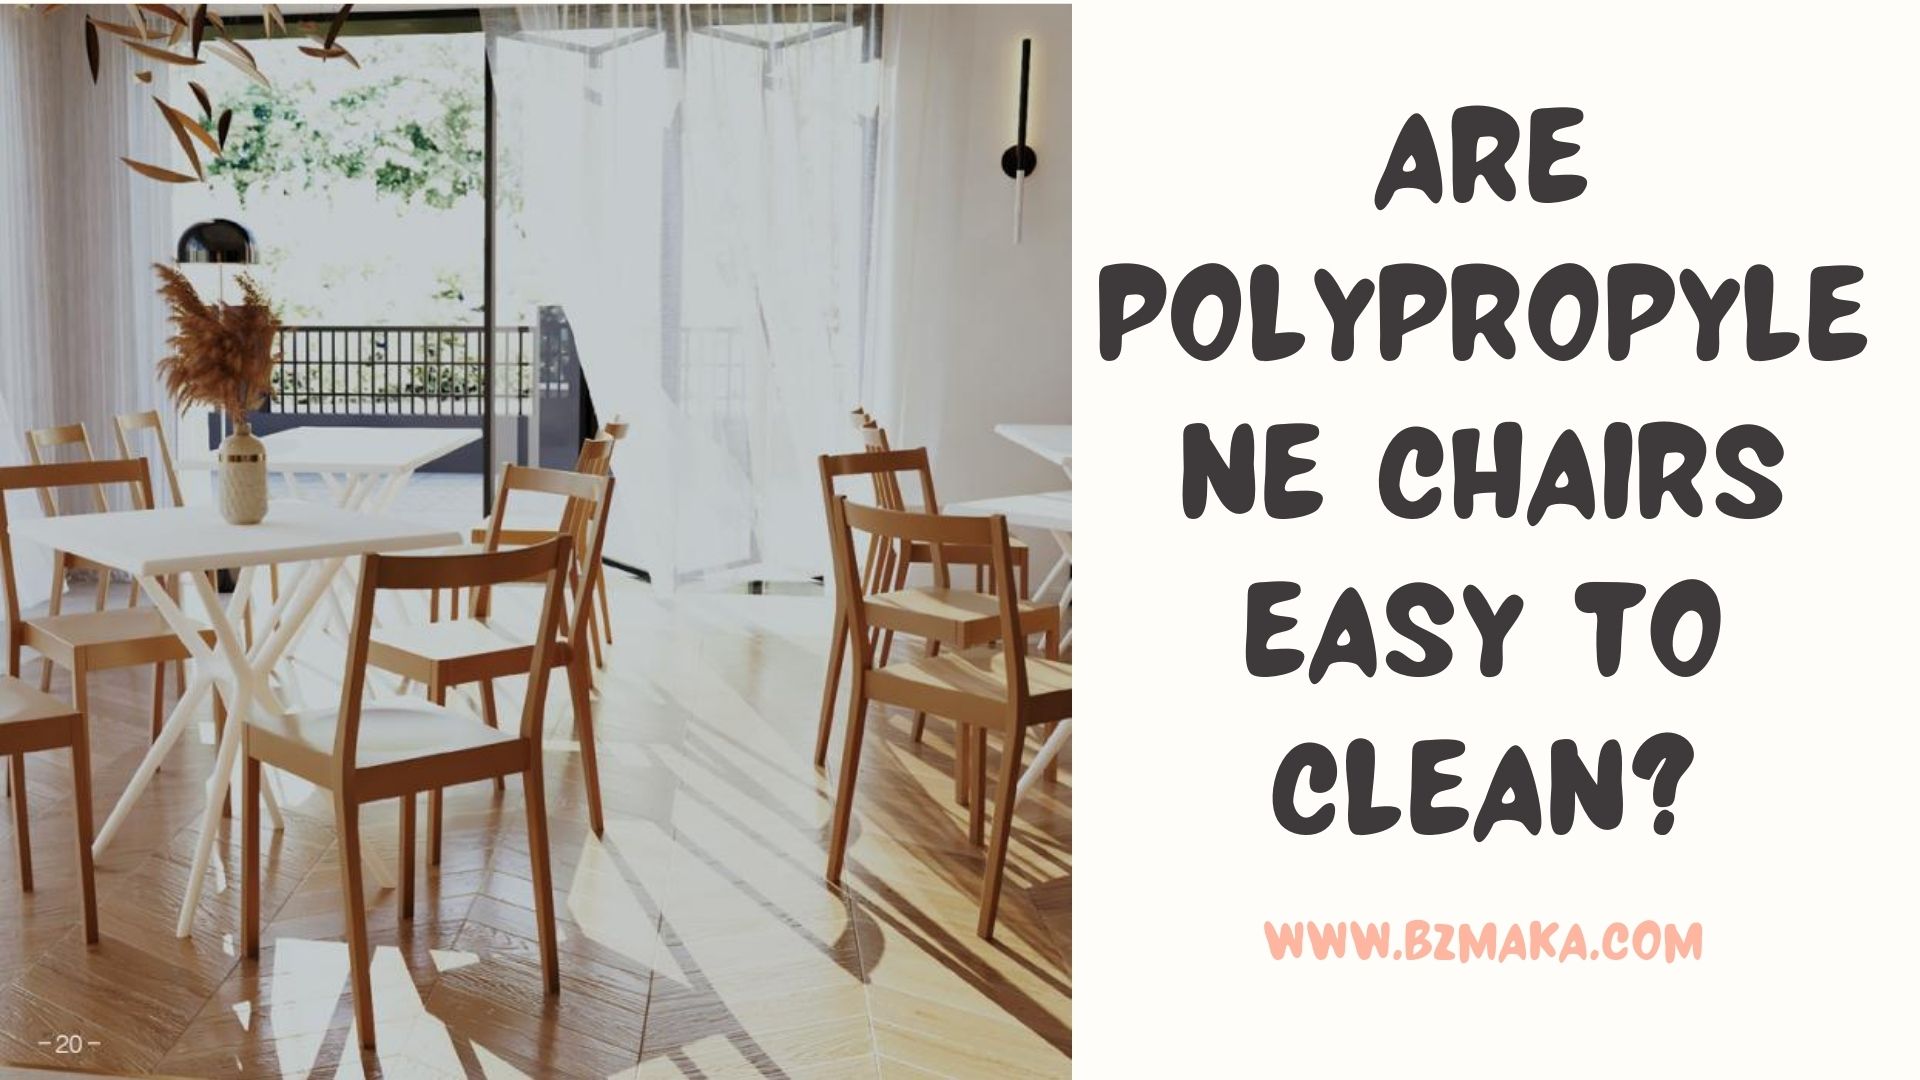 Are polypropylene chairs easy to clean